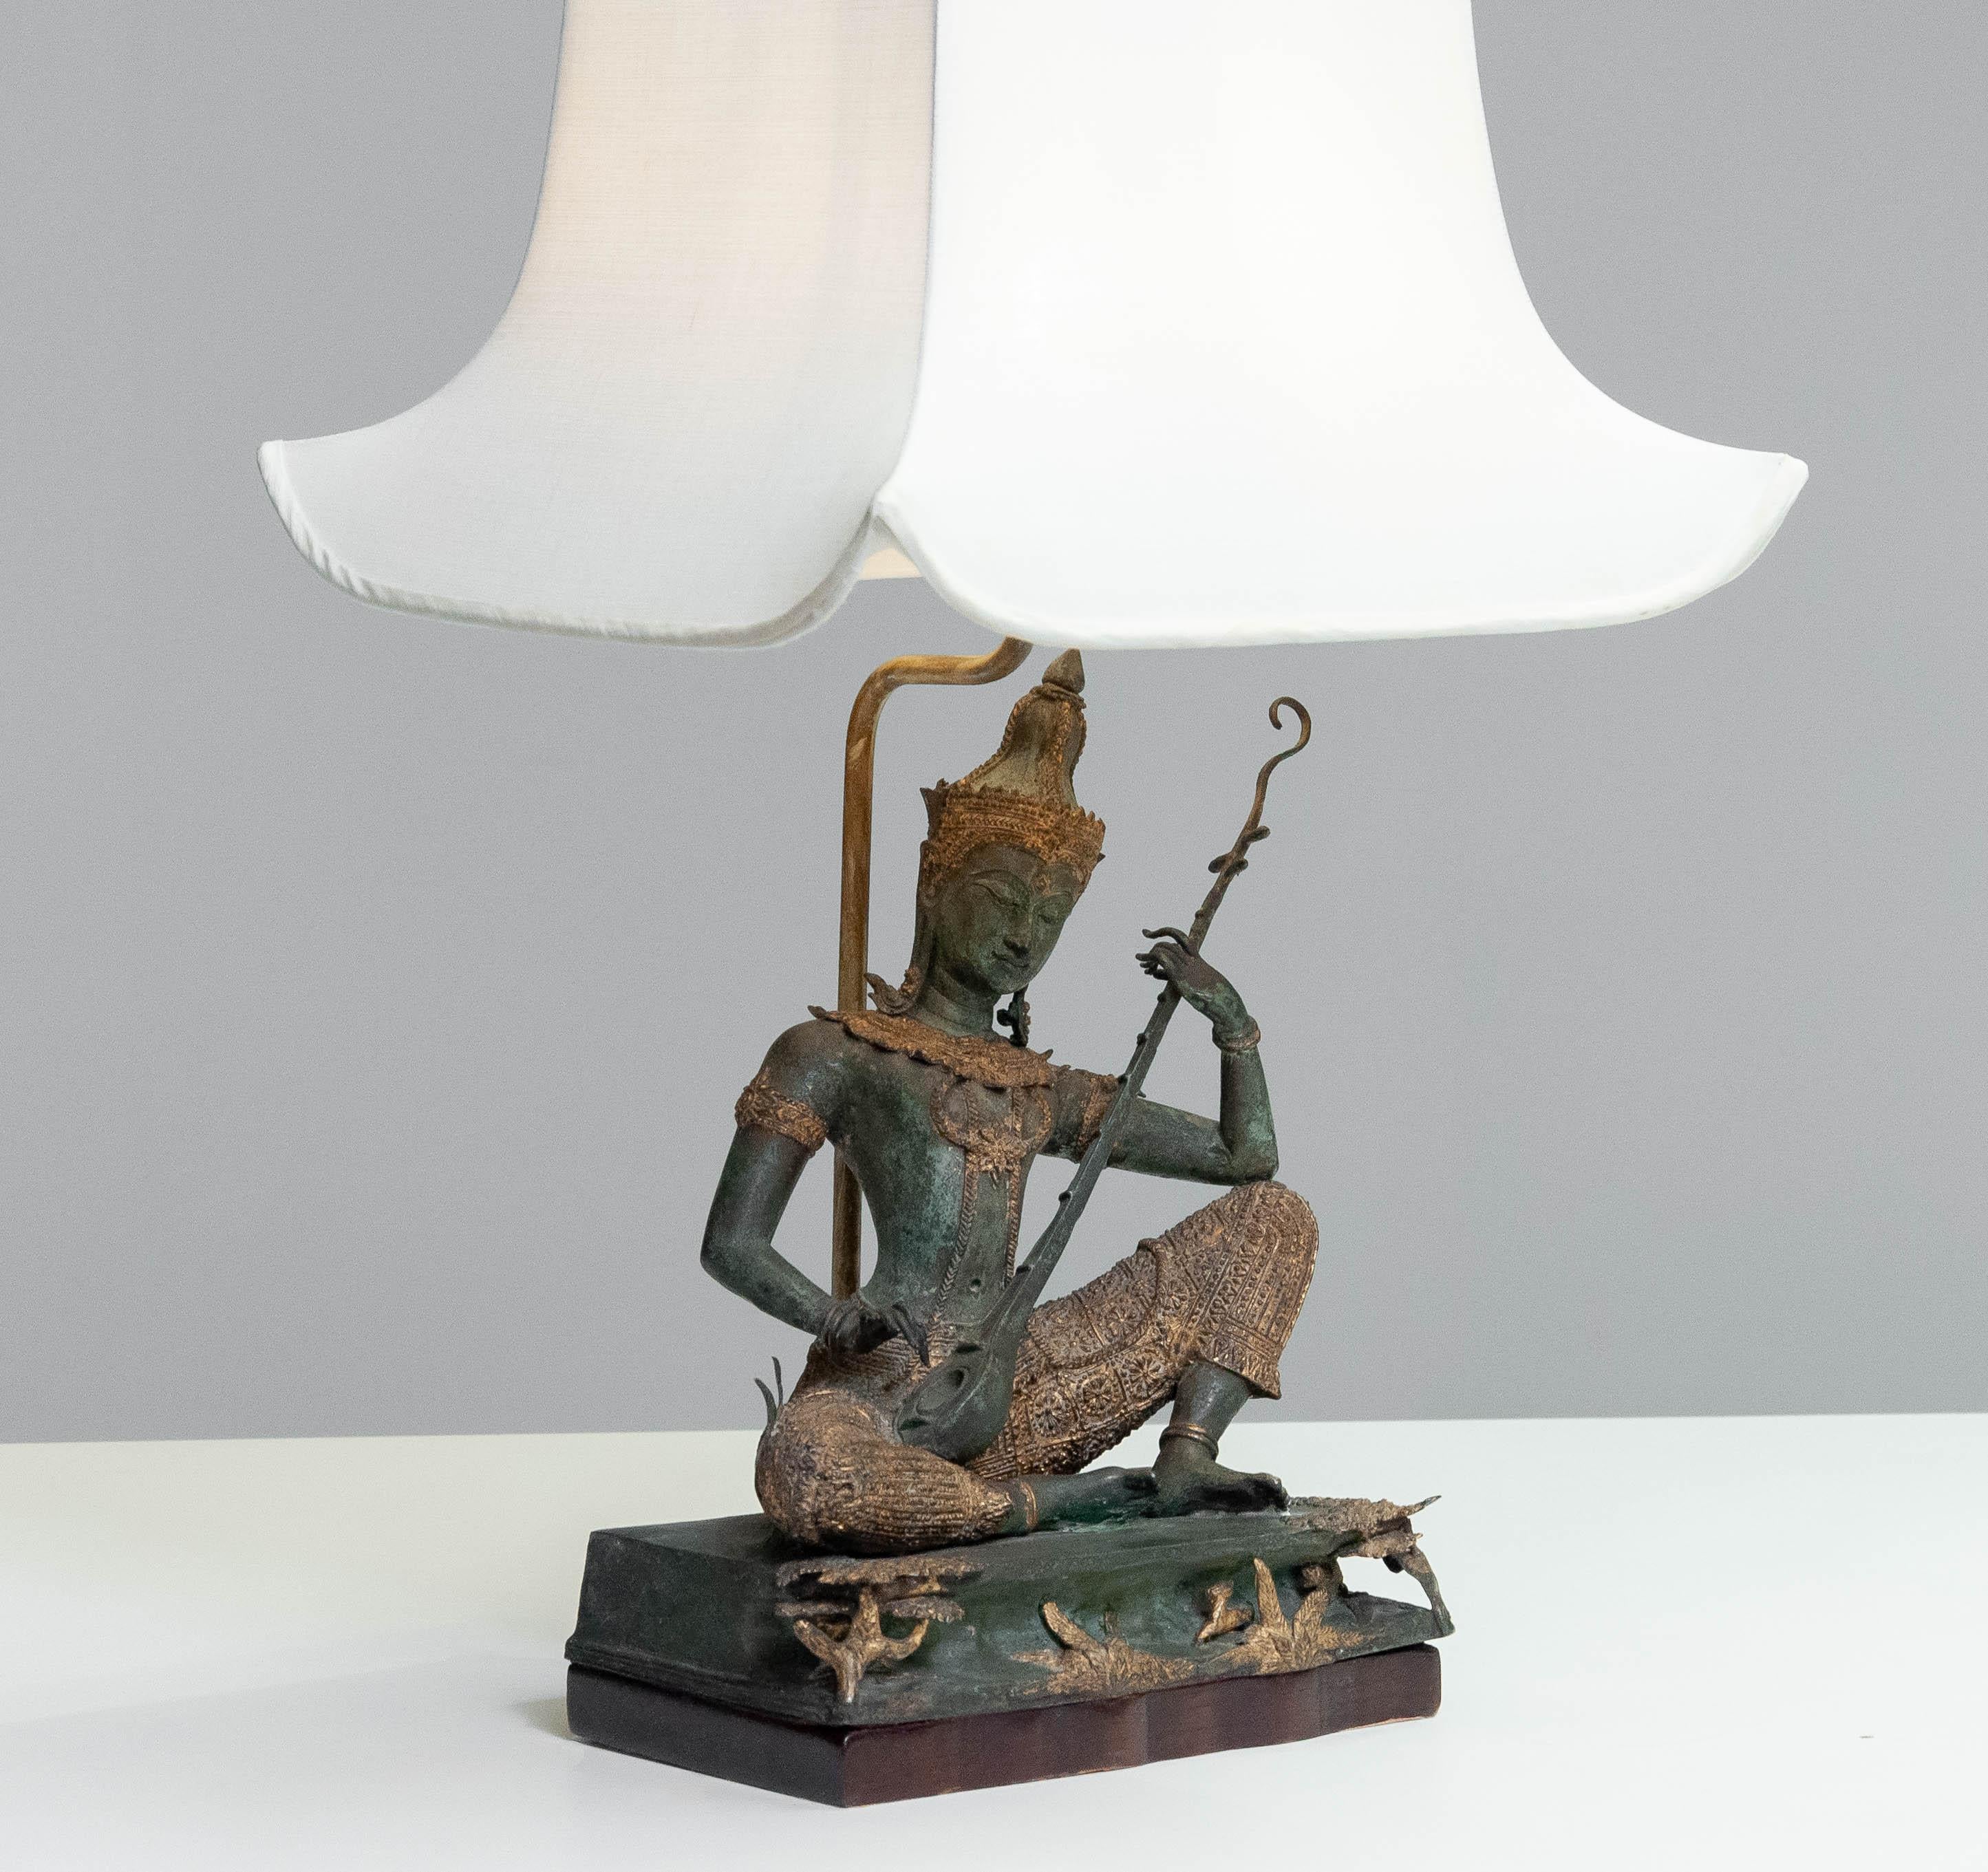 1970s Asian Vintage Table Lamp with Bronze / Gild Statue of Phra Aphai Mani In Good Condition For Sale In Silvolde, Gelderland